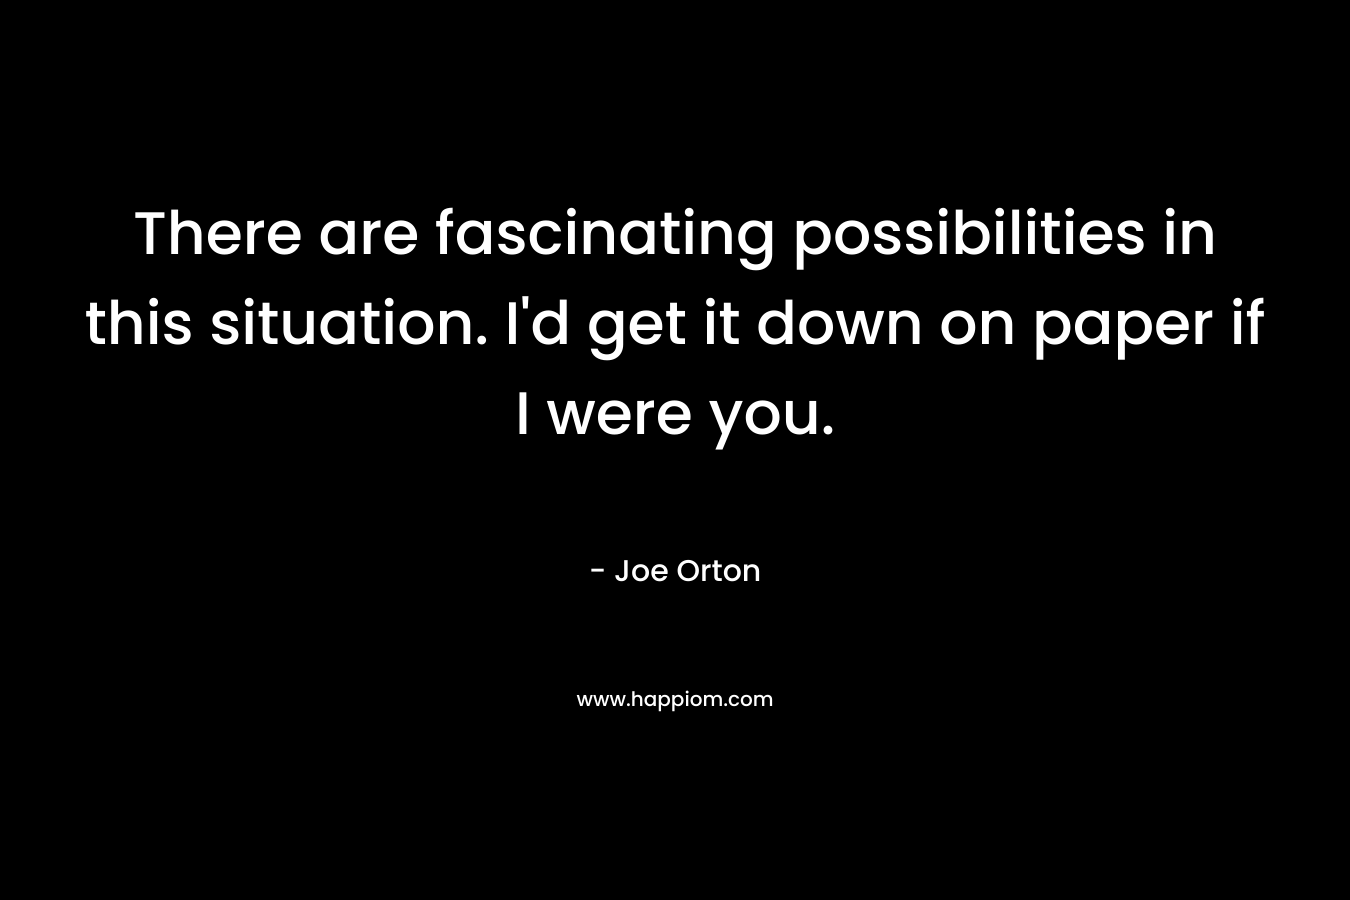 There are fascinating possibilities in this situation. I’d get it down on paper if I were you. – Joe Orton